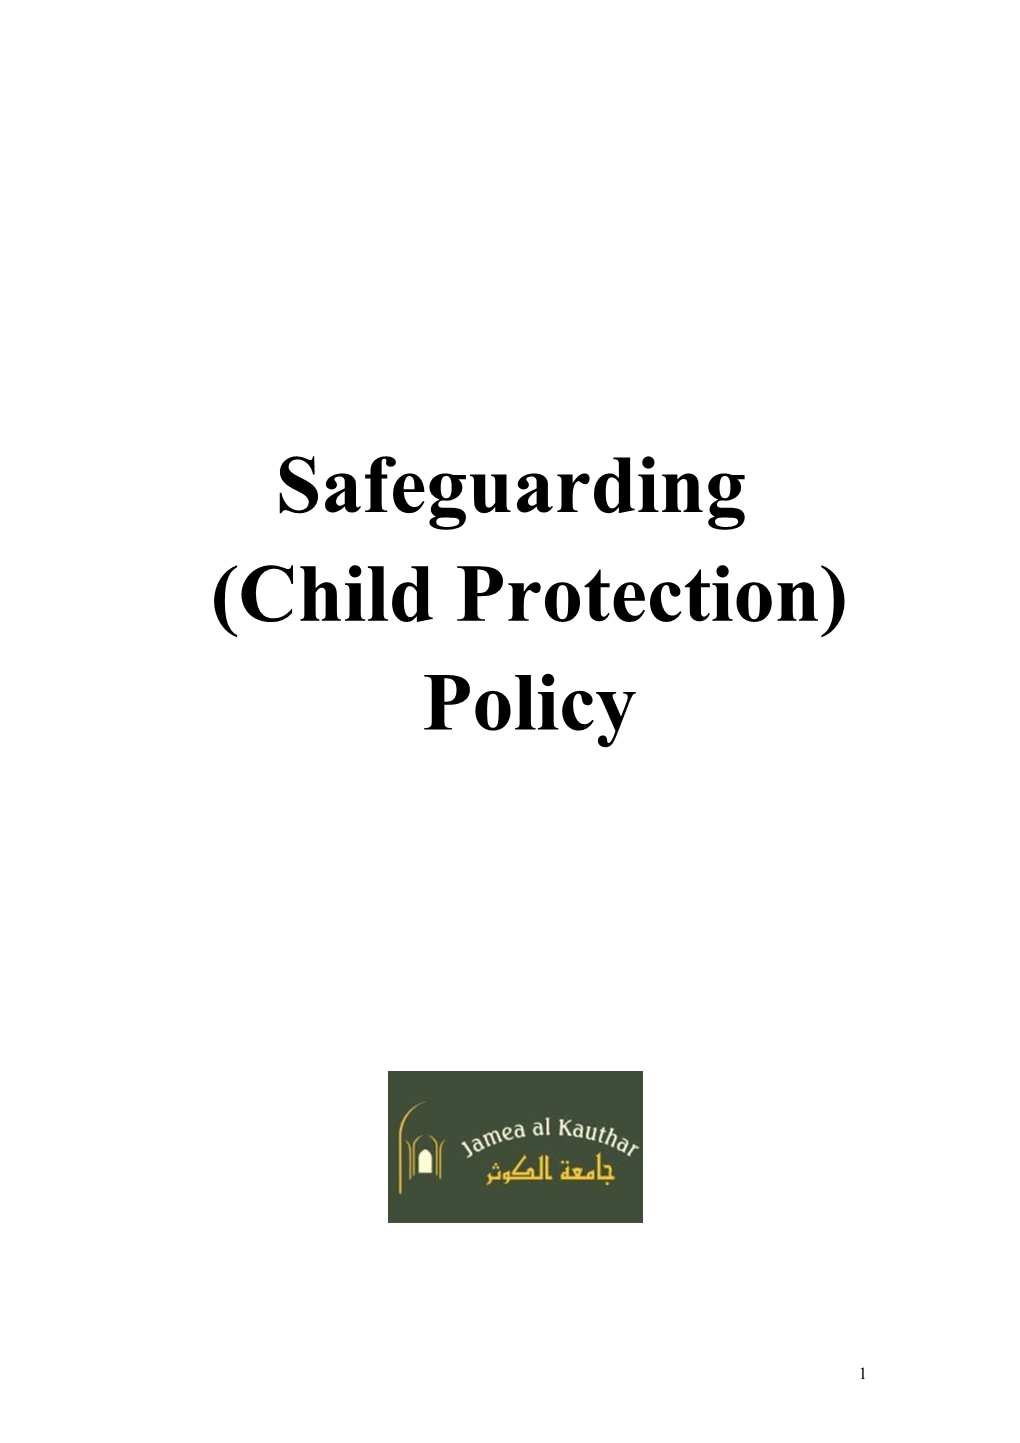 Safeguarding (Child Protection) Policy